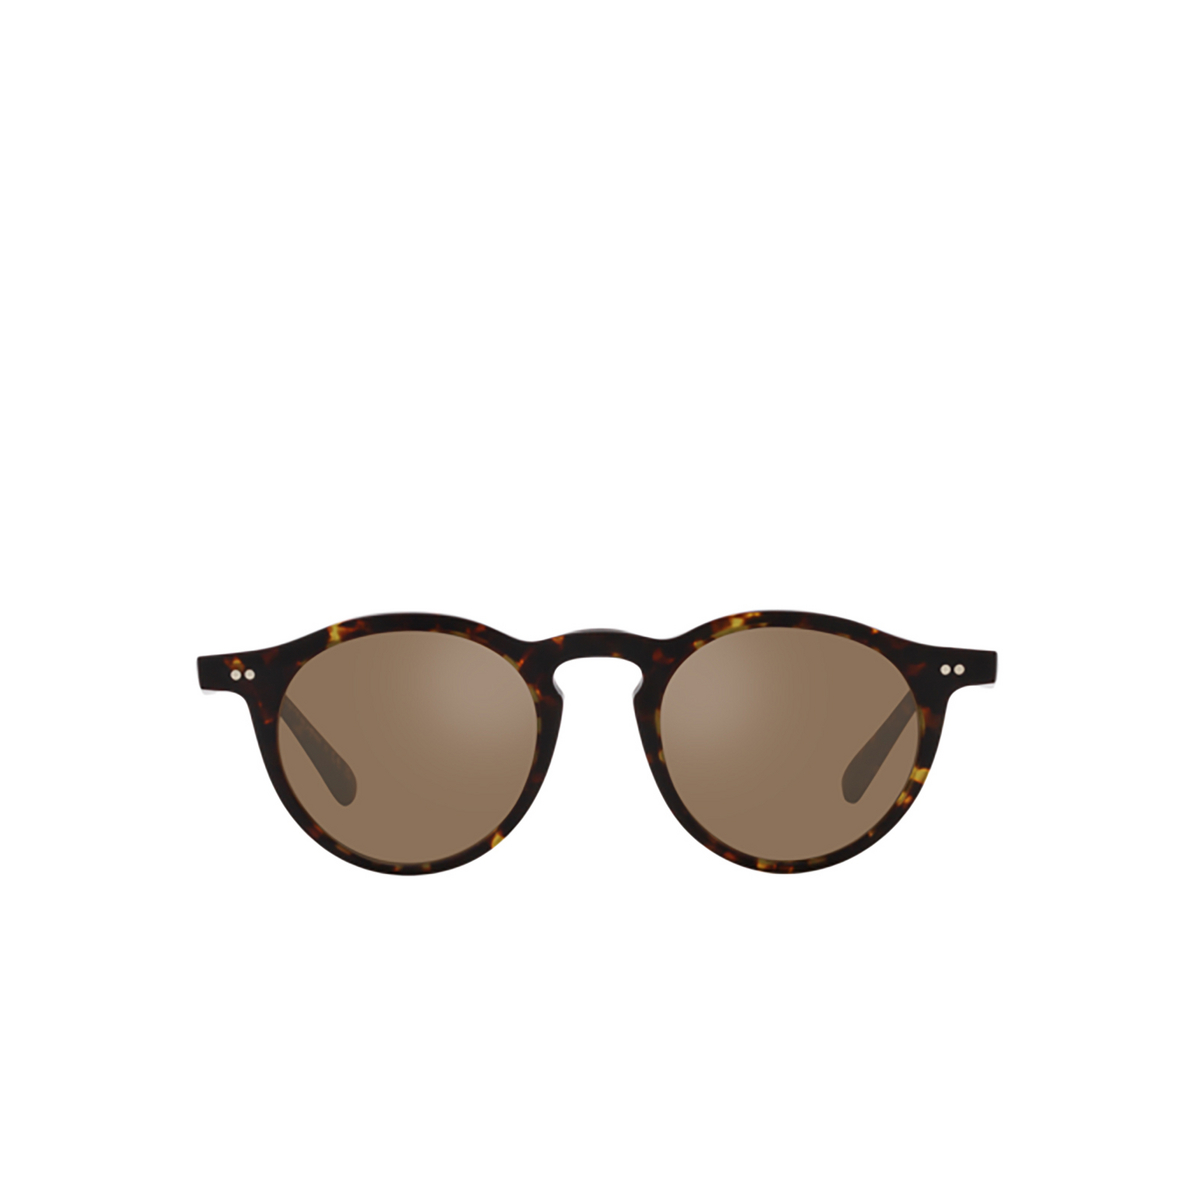 Oliver Peoples OP-13 Sunglasses 1759G8 Semi Matte Atago Tortoise - front view